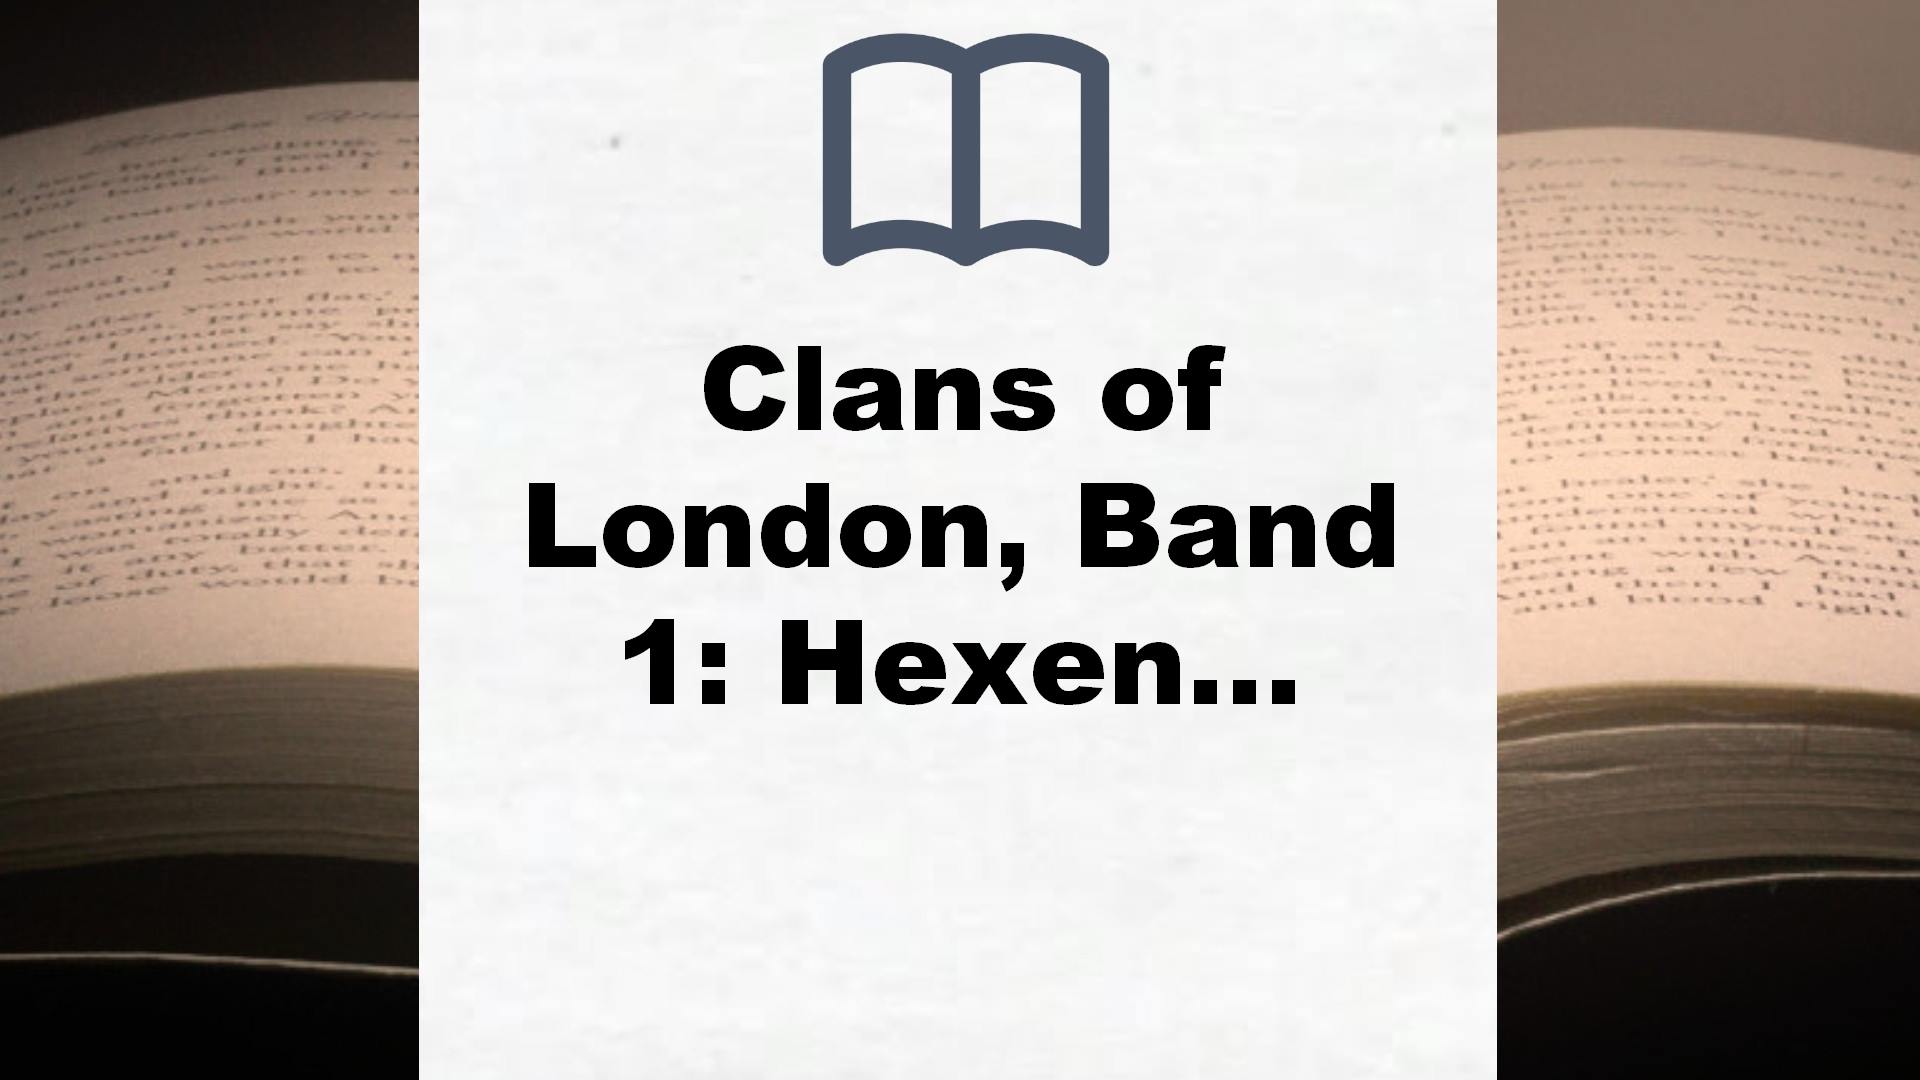 Clans of London, Band 1: Hexentochter (Clans of London, 1) – Buchrezension